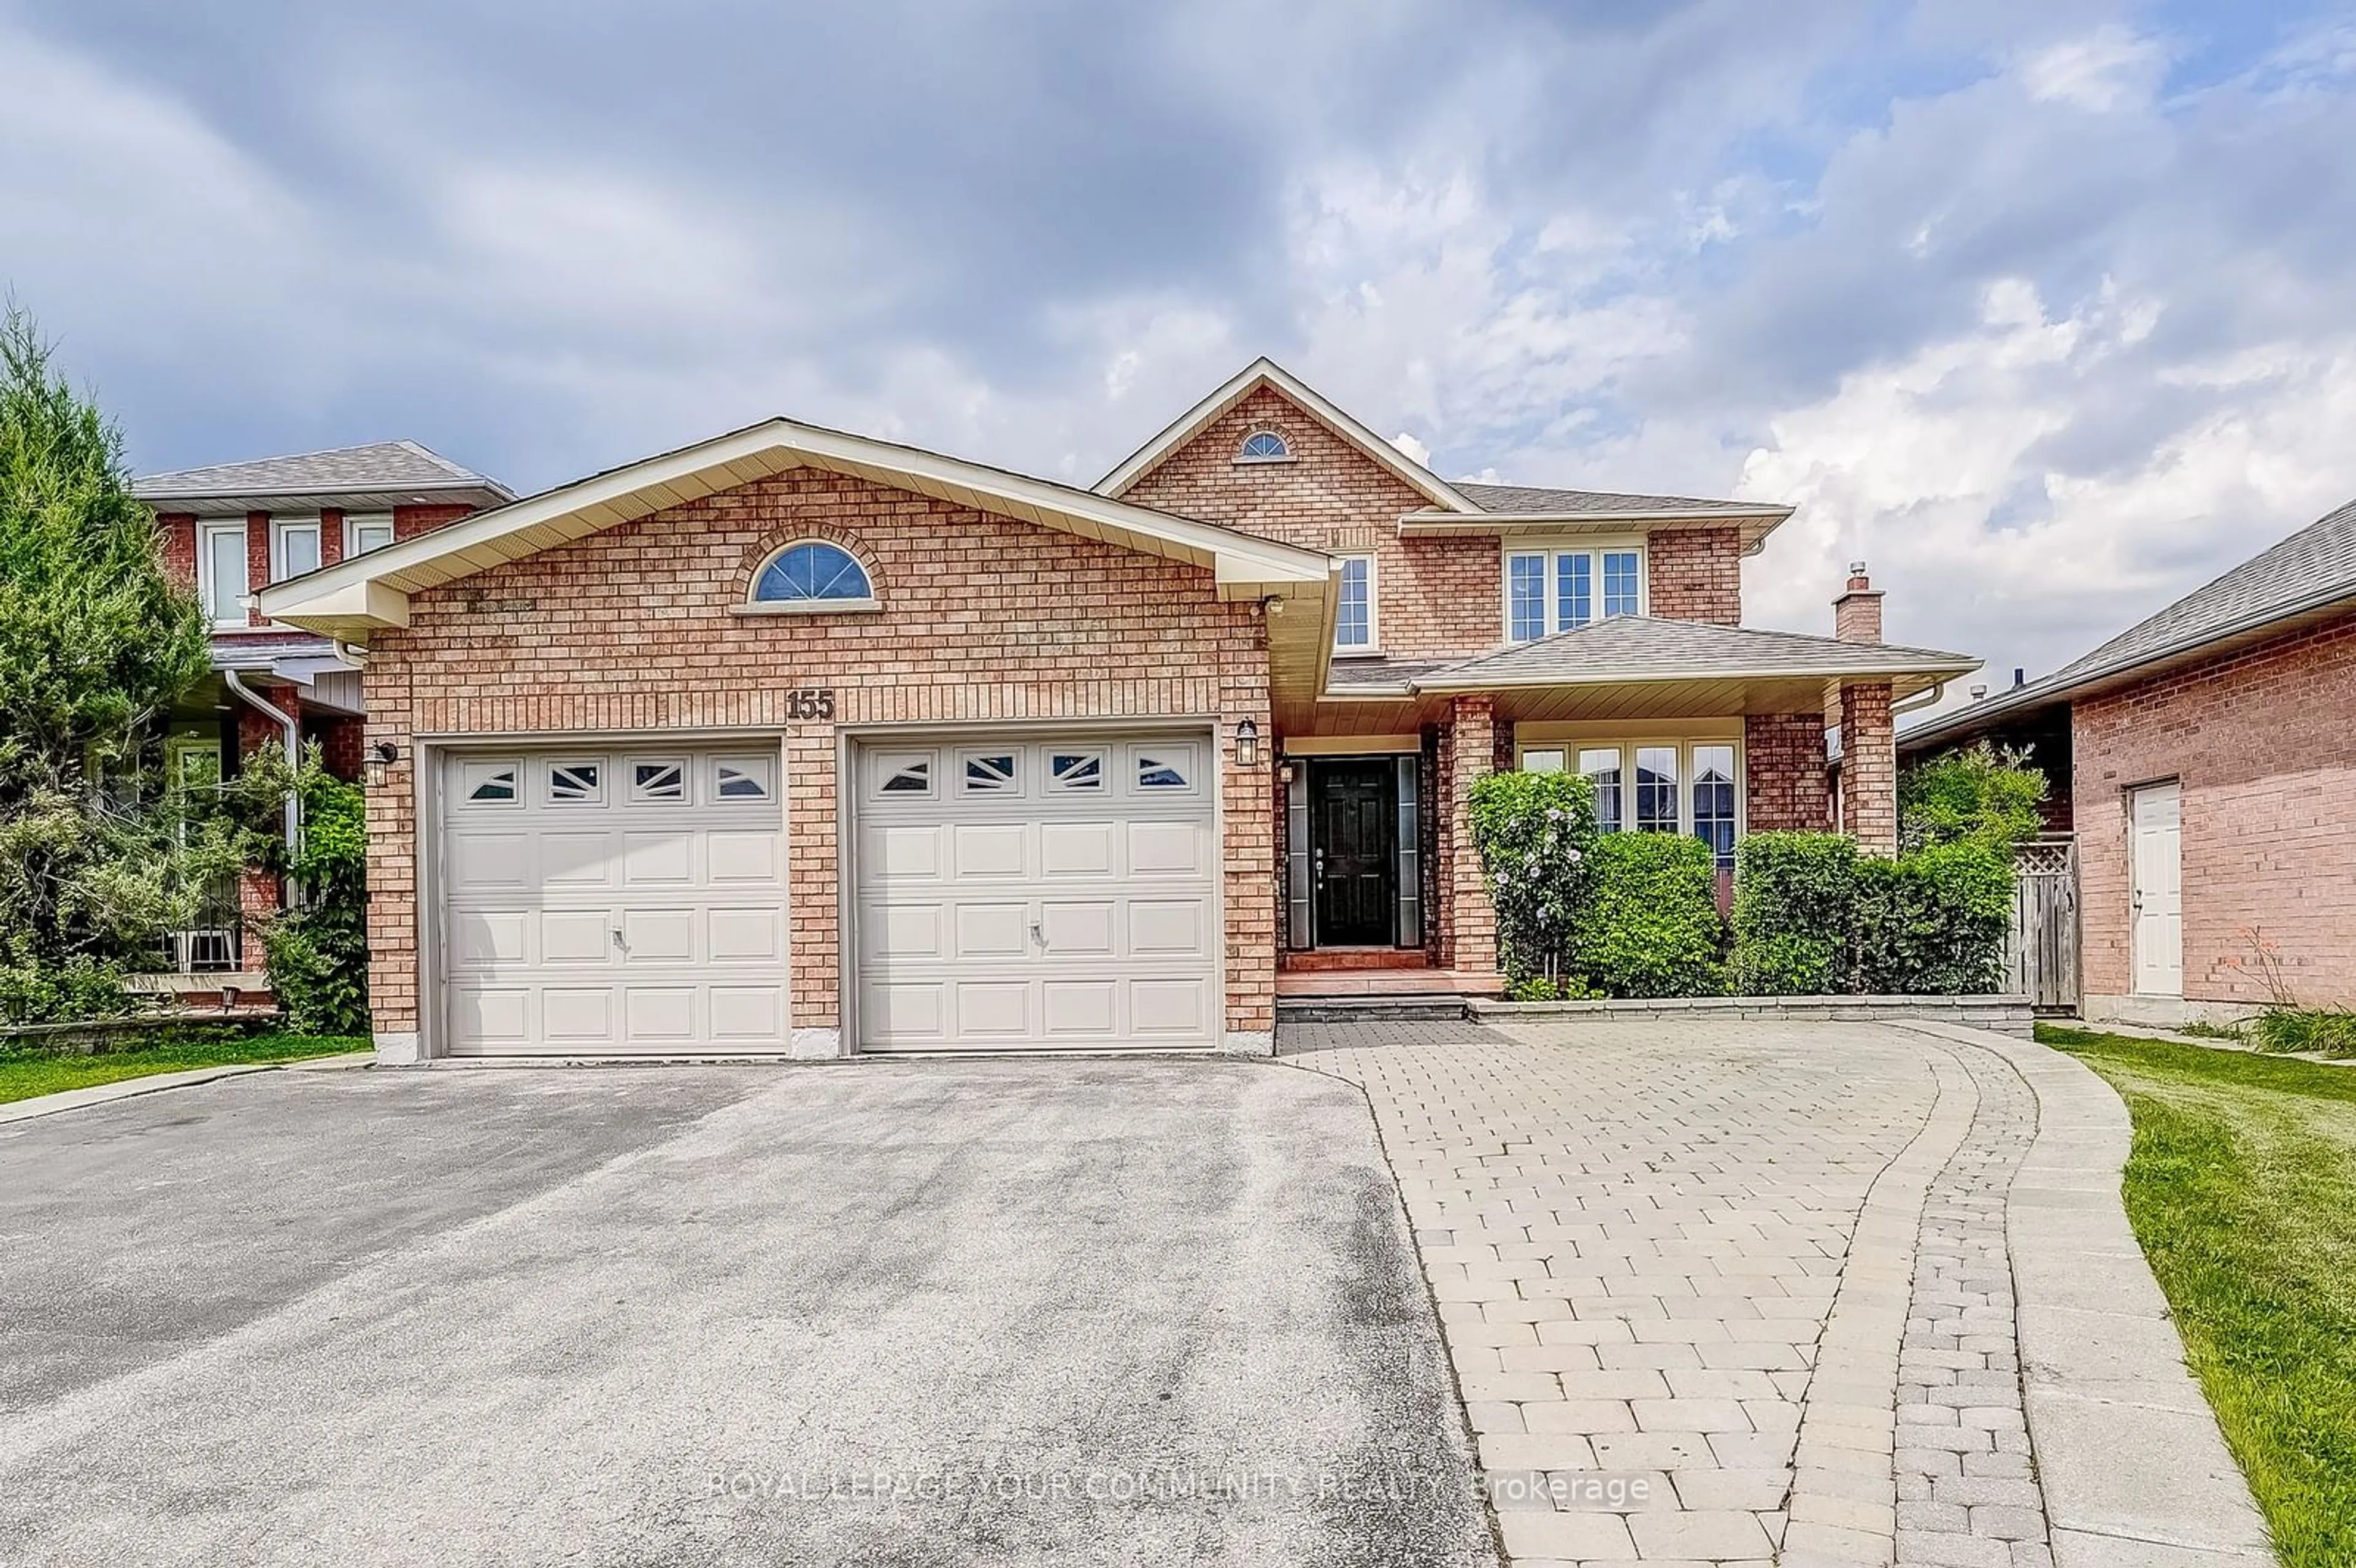 Home with brick exterior material for 155 Mapes Ave, Vaughan Ontario L4L 8R9